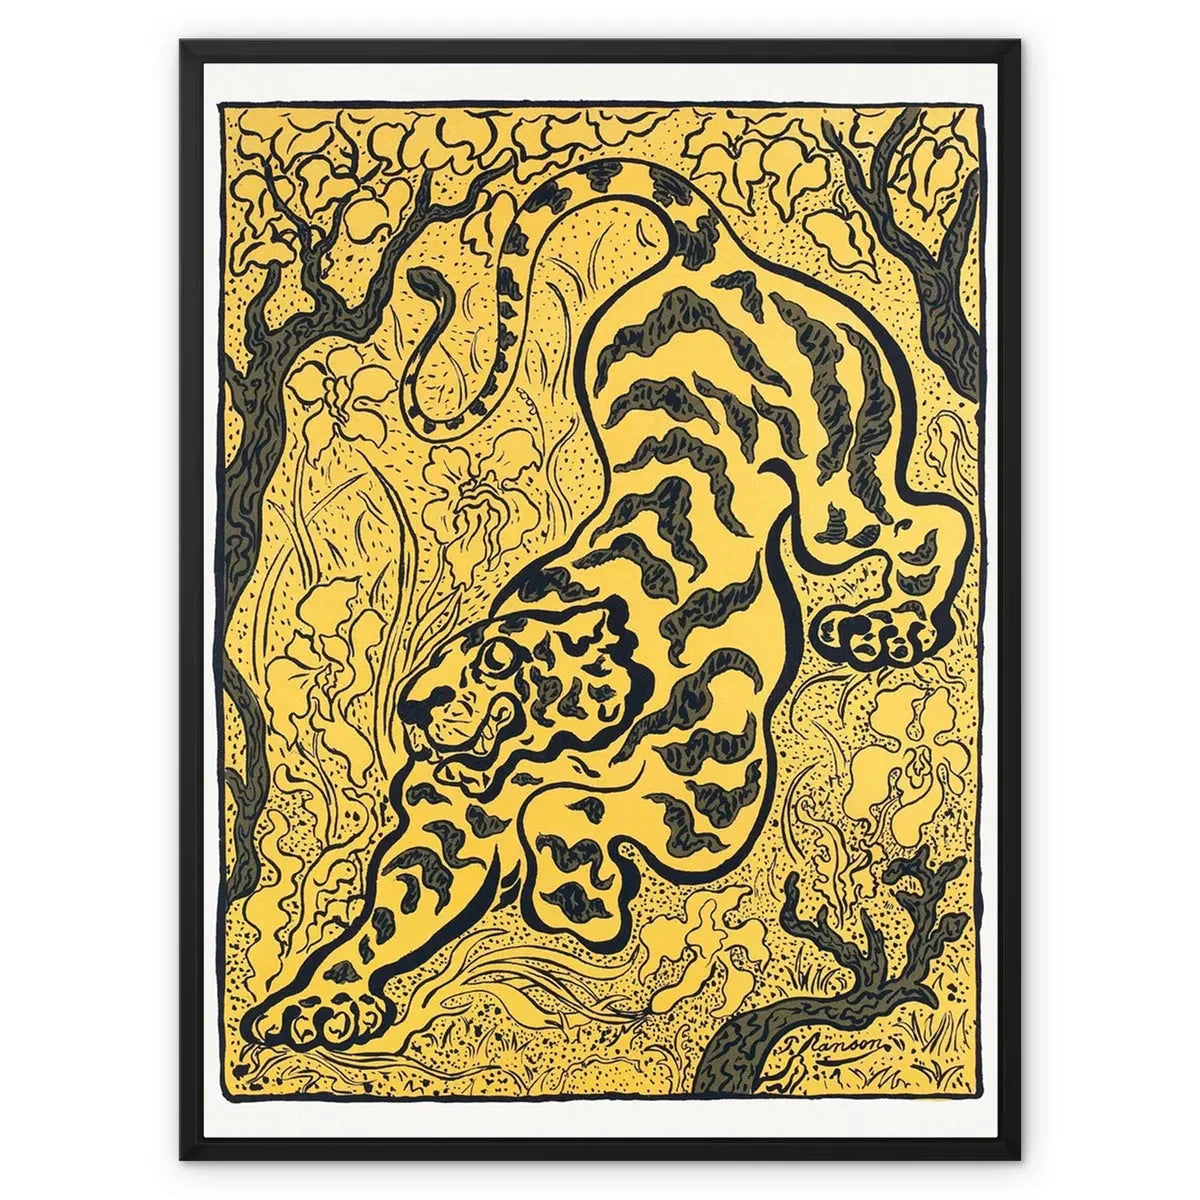 Tiger In The Jungle By Paul Ranson Framed Canvas - 24’x32’ / Black Frame / White Wrap - Posters Prints & Visual